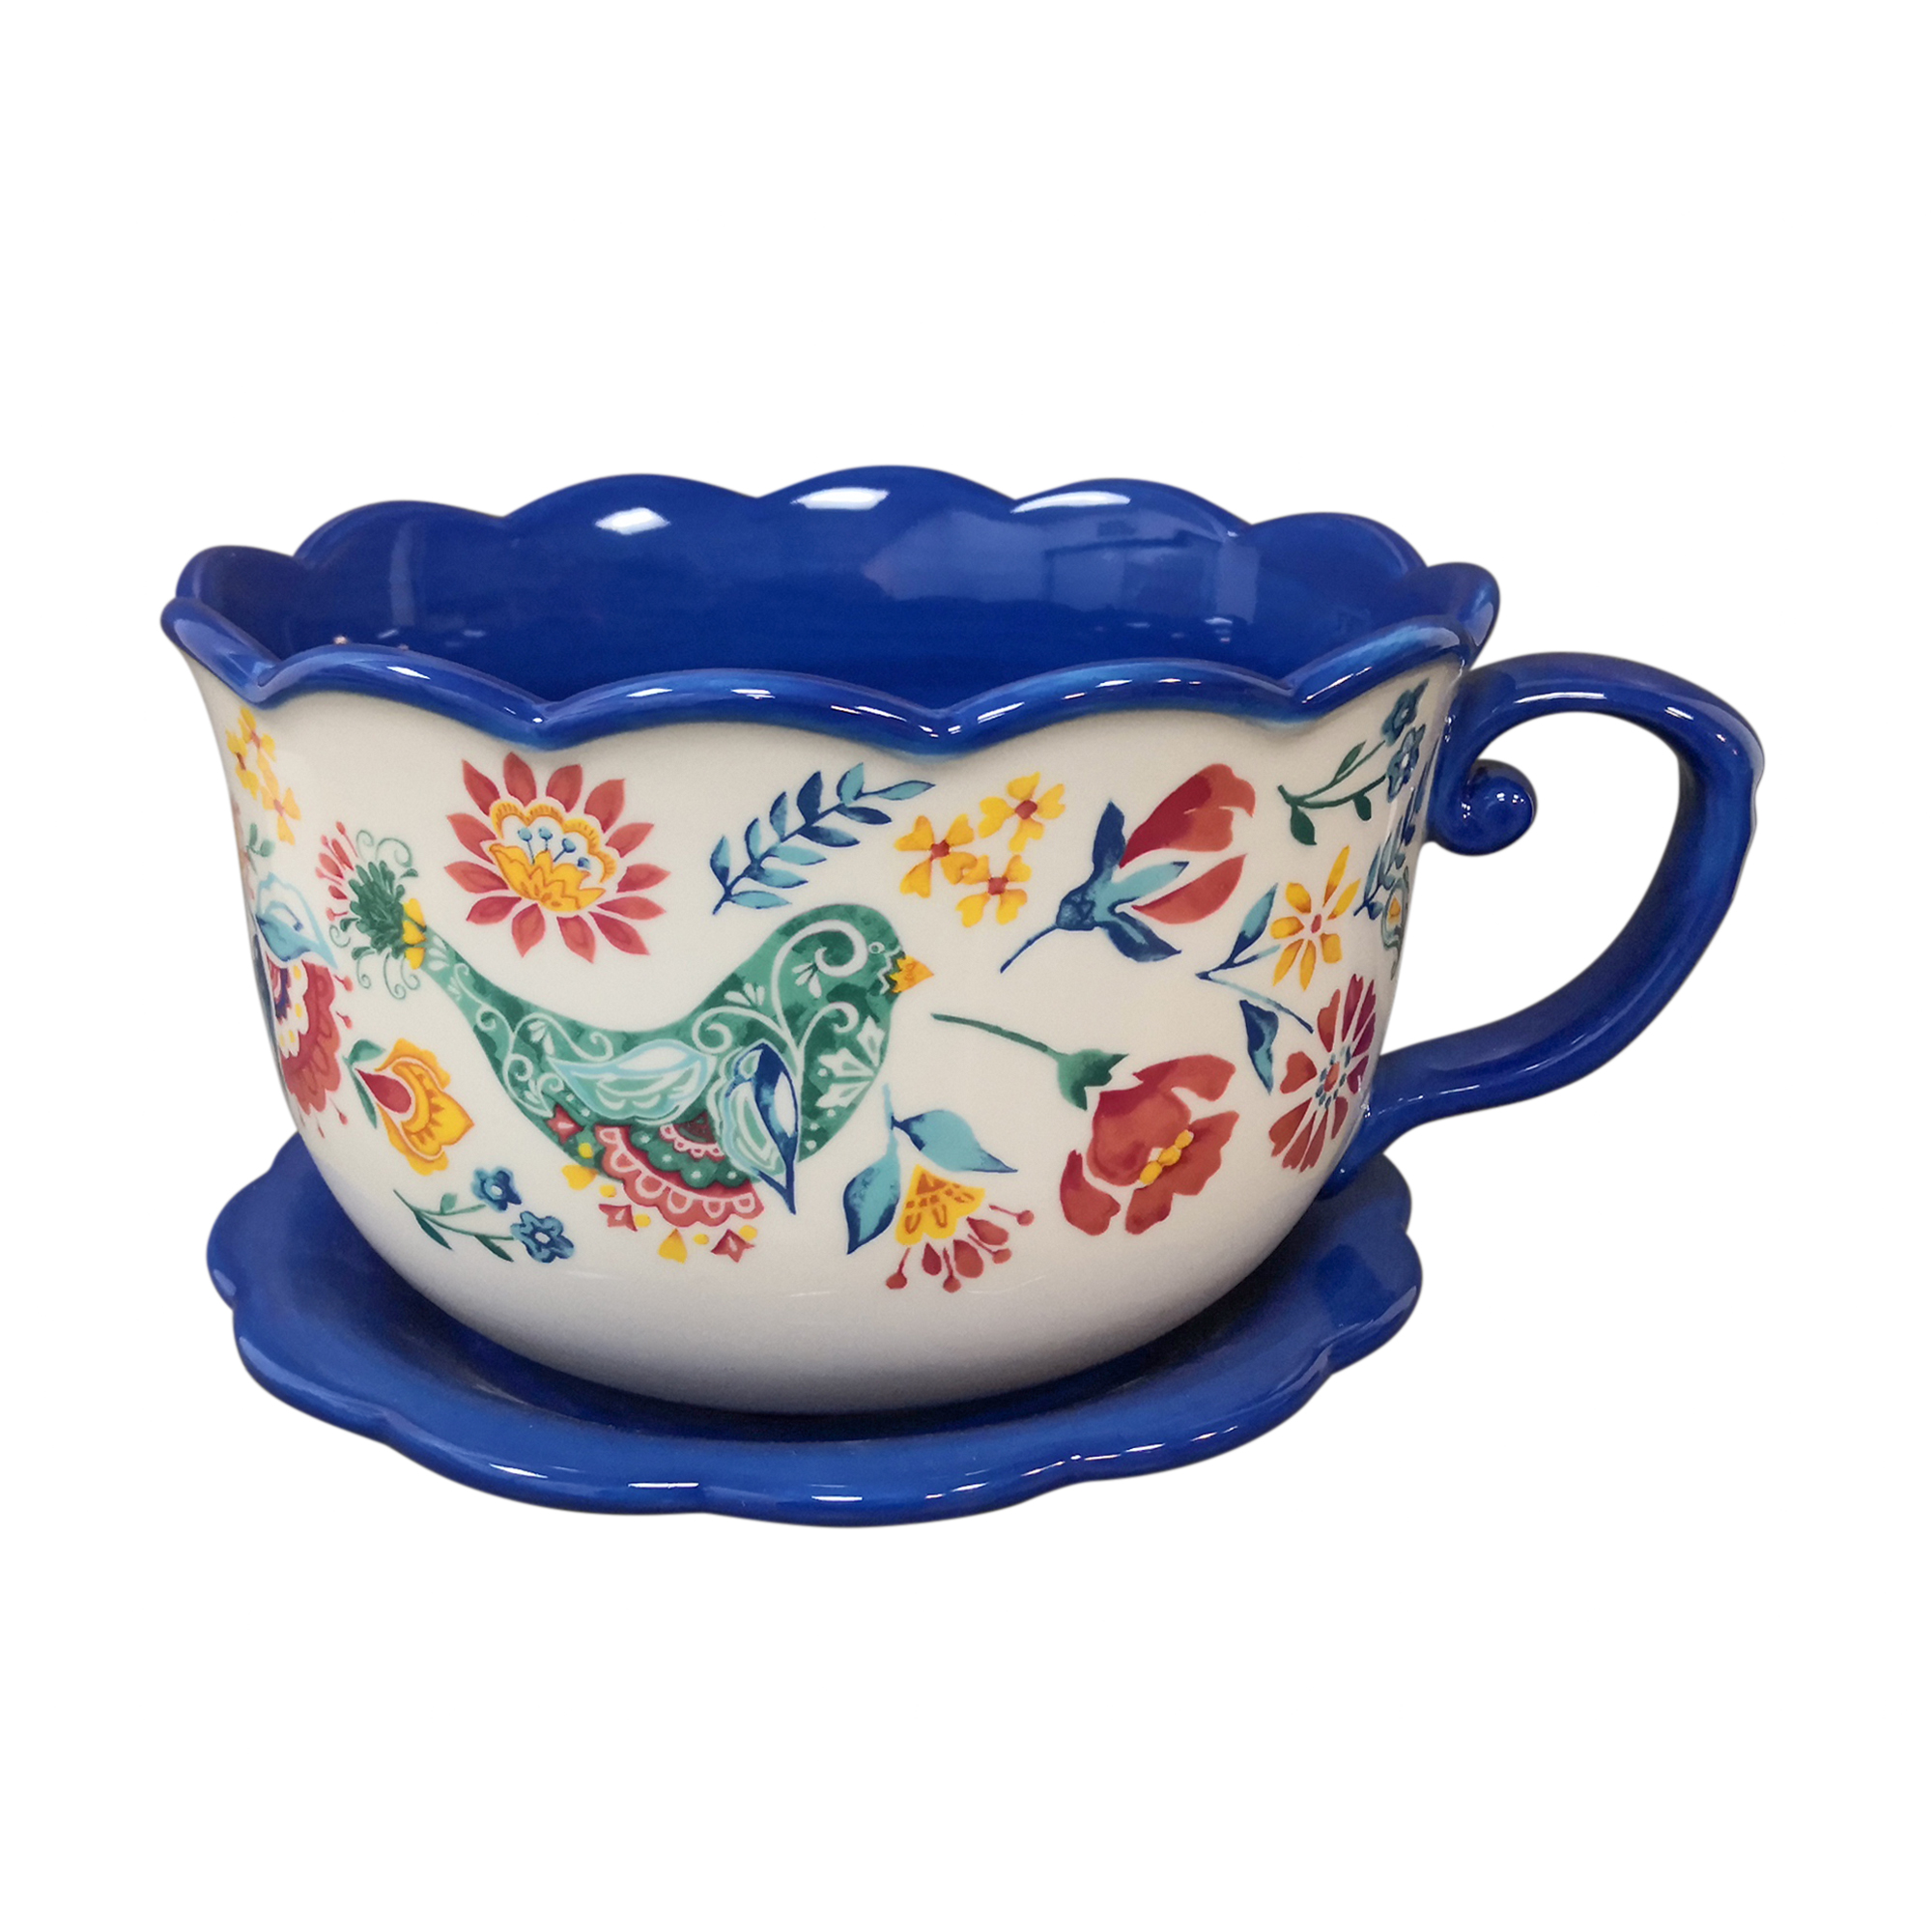 The Pioneer Woman Teapcup Planter Mazie, 10 in, Stoneware - image 1 of 4